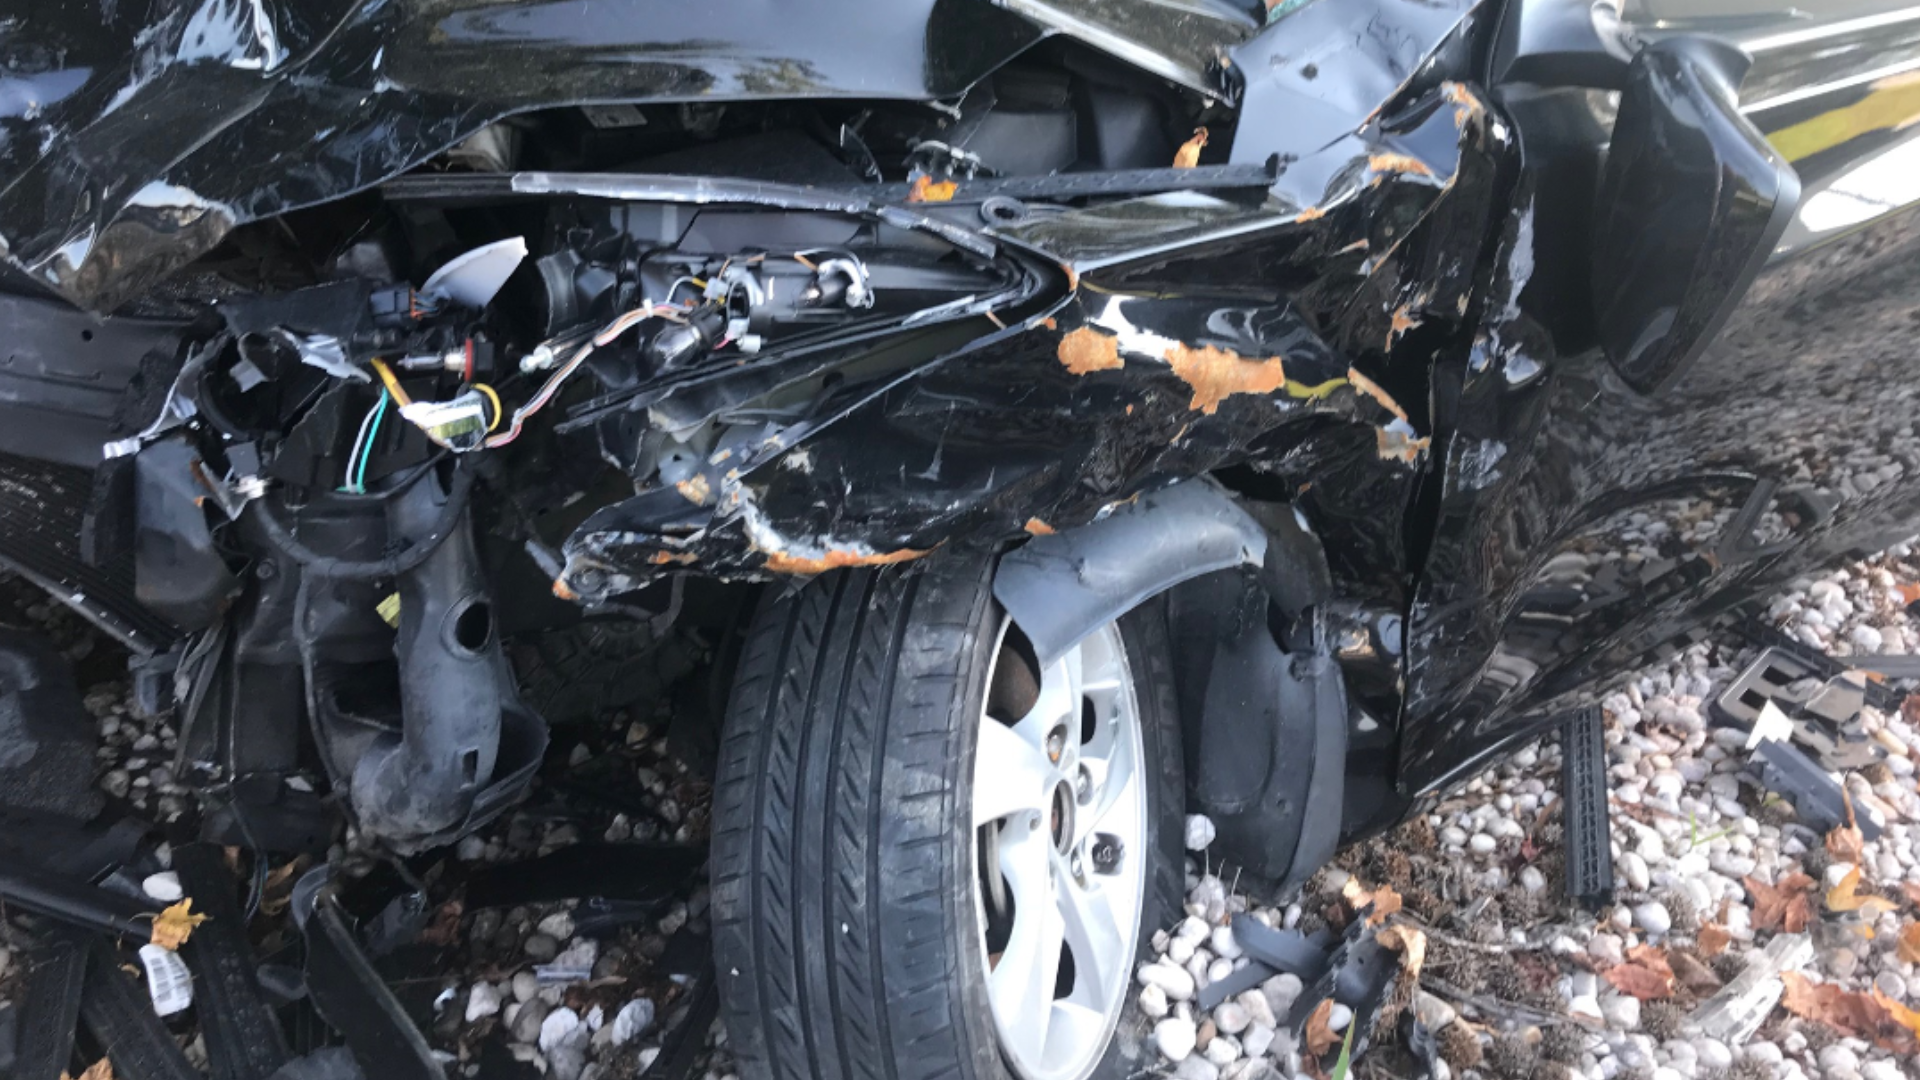 After a rolling shootout in Greensboro, a driver lost control and hit 6 cars. The car owners thought they had to pay for the repairs, but 2 Wants to Know helped.